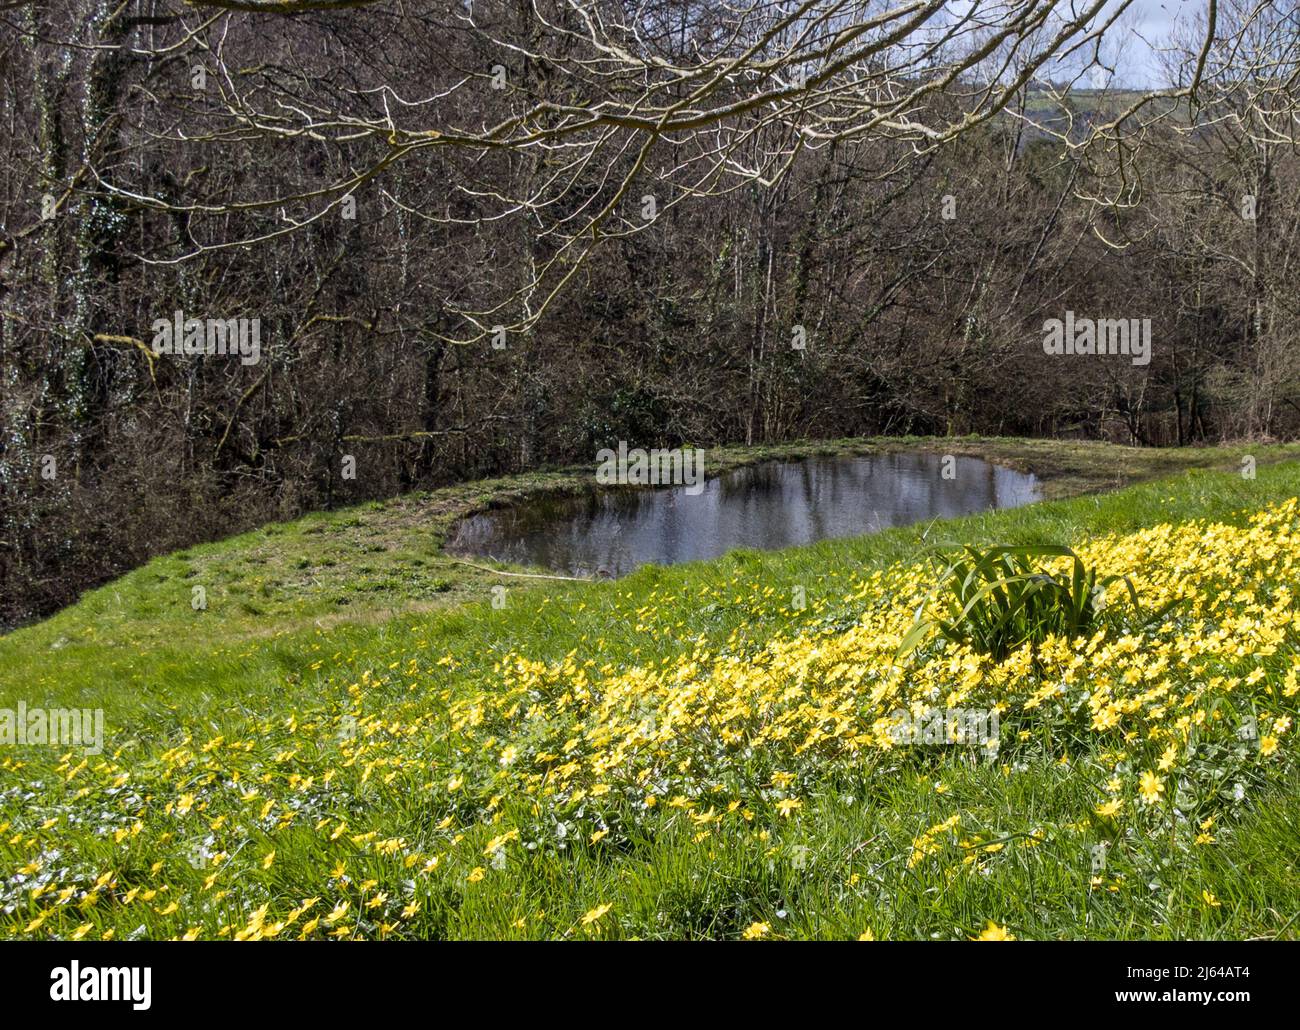 UK, England. Pond construction on a sloping field.10 x 5 meters. The completed pond four years later. It fills with rainwater draining from the field. Stock Photo